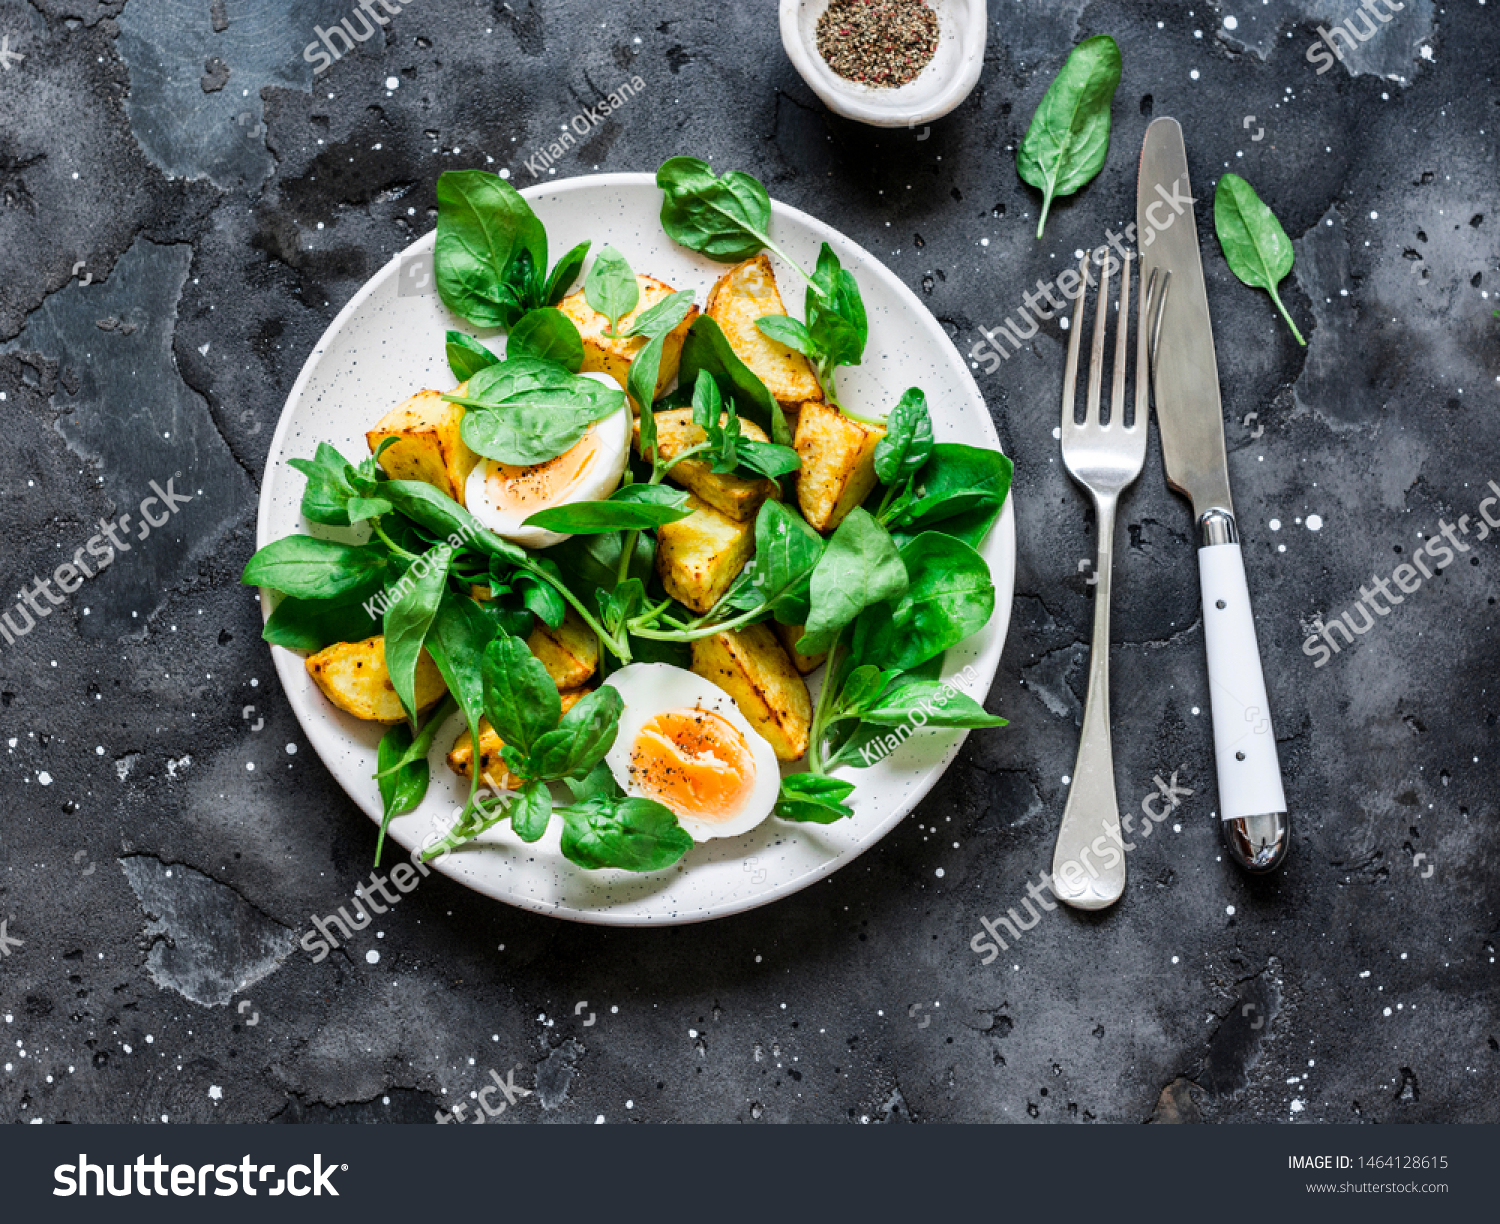 Baked potato, boiled egg and spinach salad on dark background, top view #1464128615